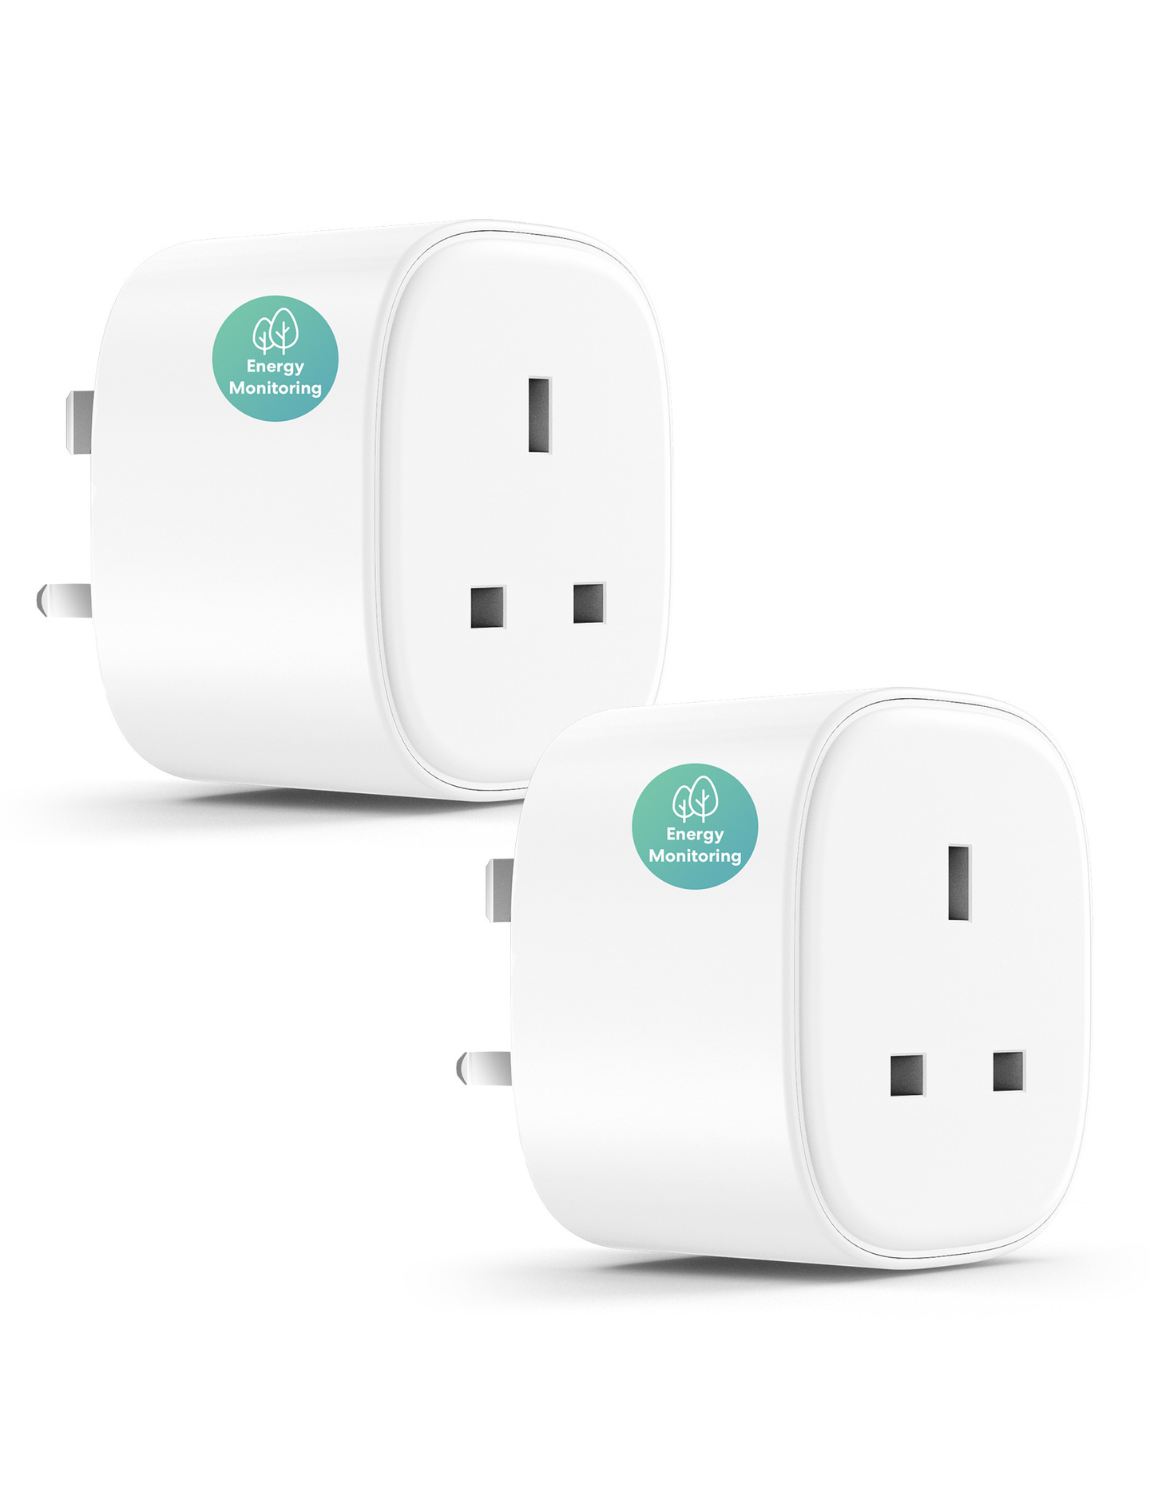 Meross Smart Wi-Fi Plug with Energy Monitor, MSS310, 2 Pack (UK Version)